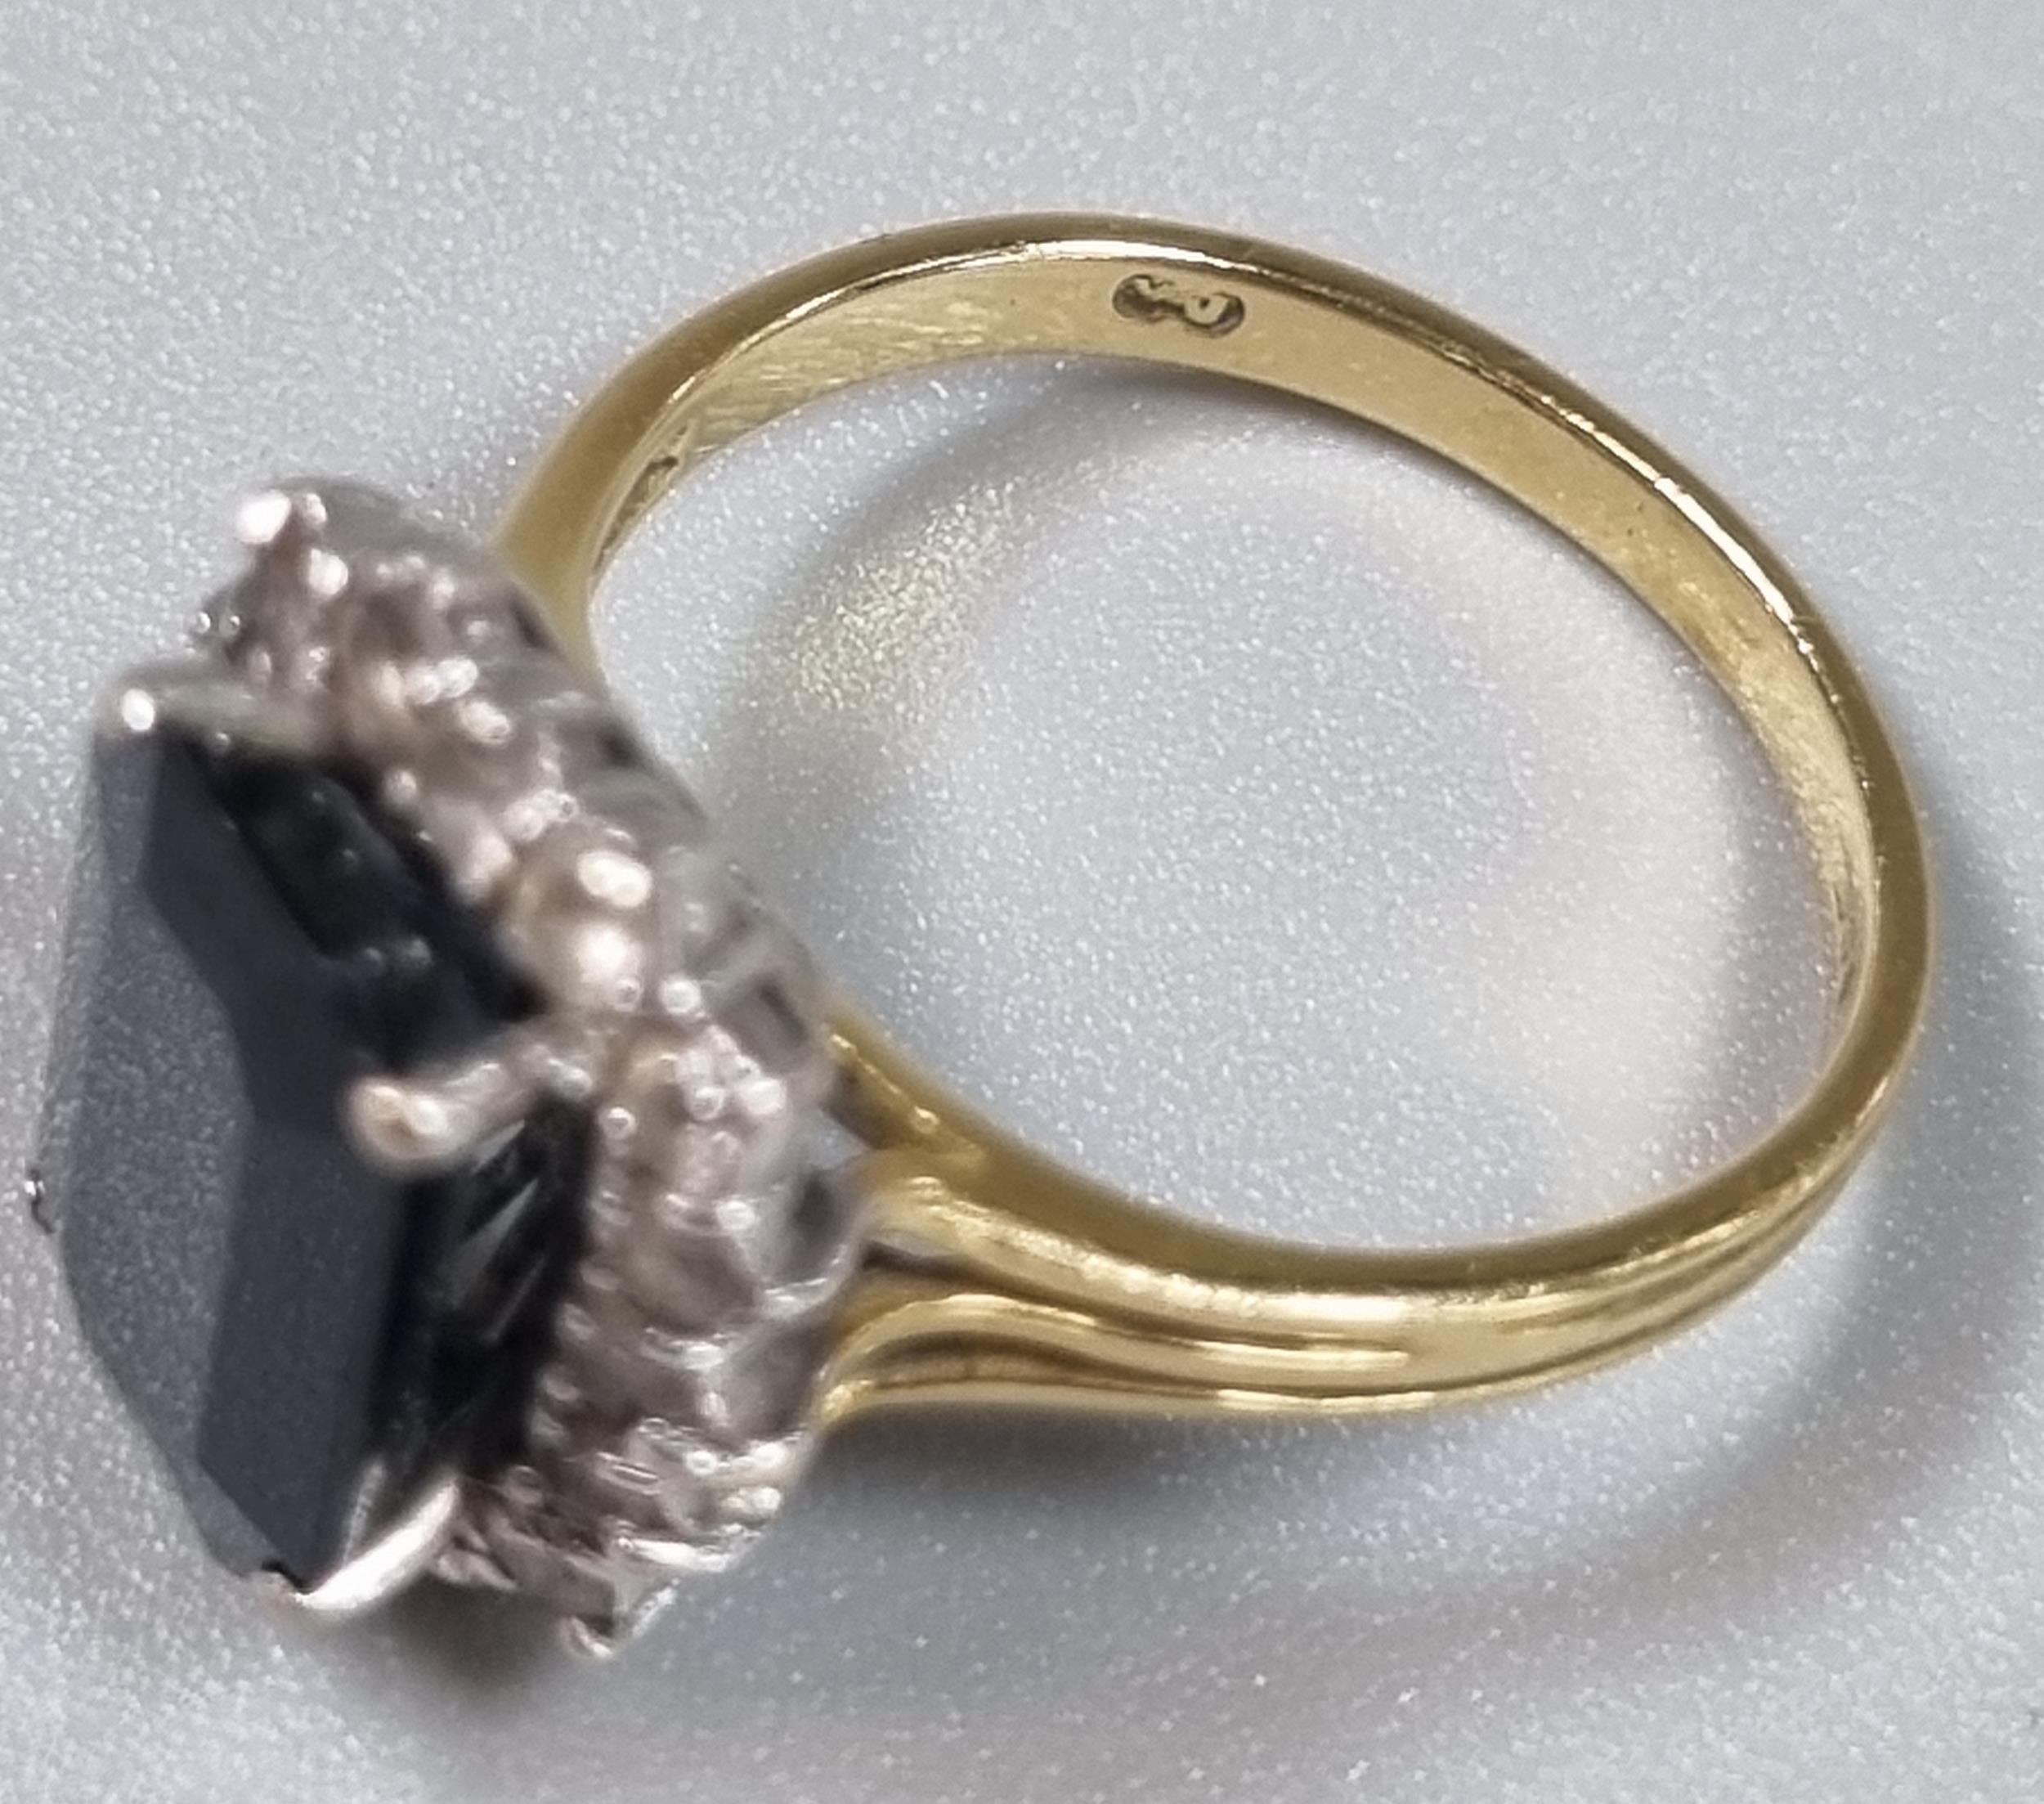 18ct gold diamond and black stone ring (possibly sapphire). 4.3g approx. Size L1/2. (B.P. 21% + VAT) - Image 4 of 5